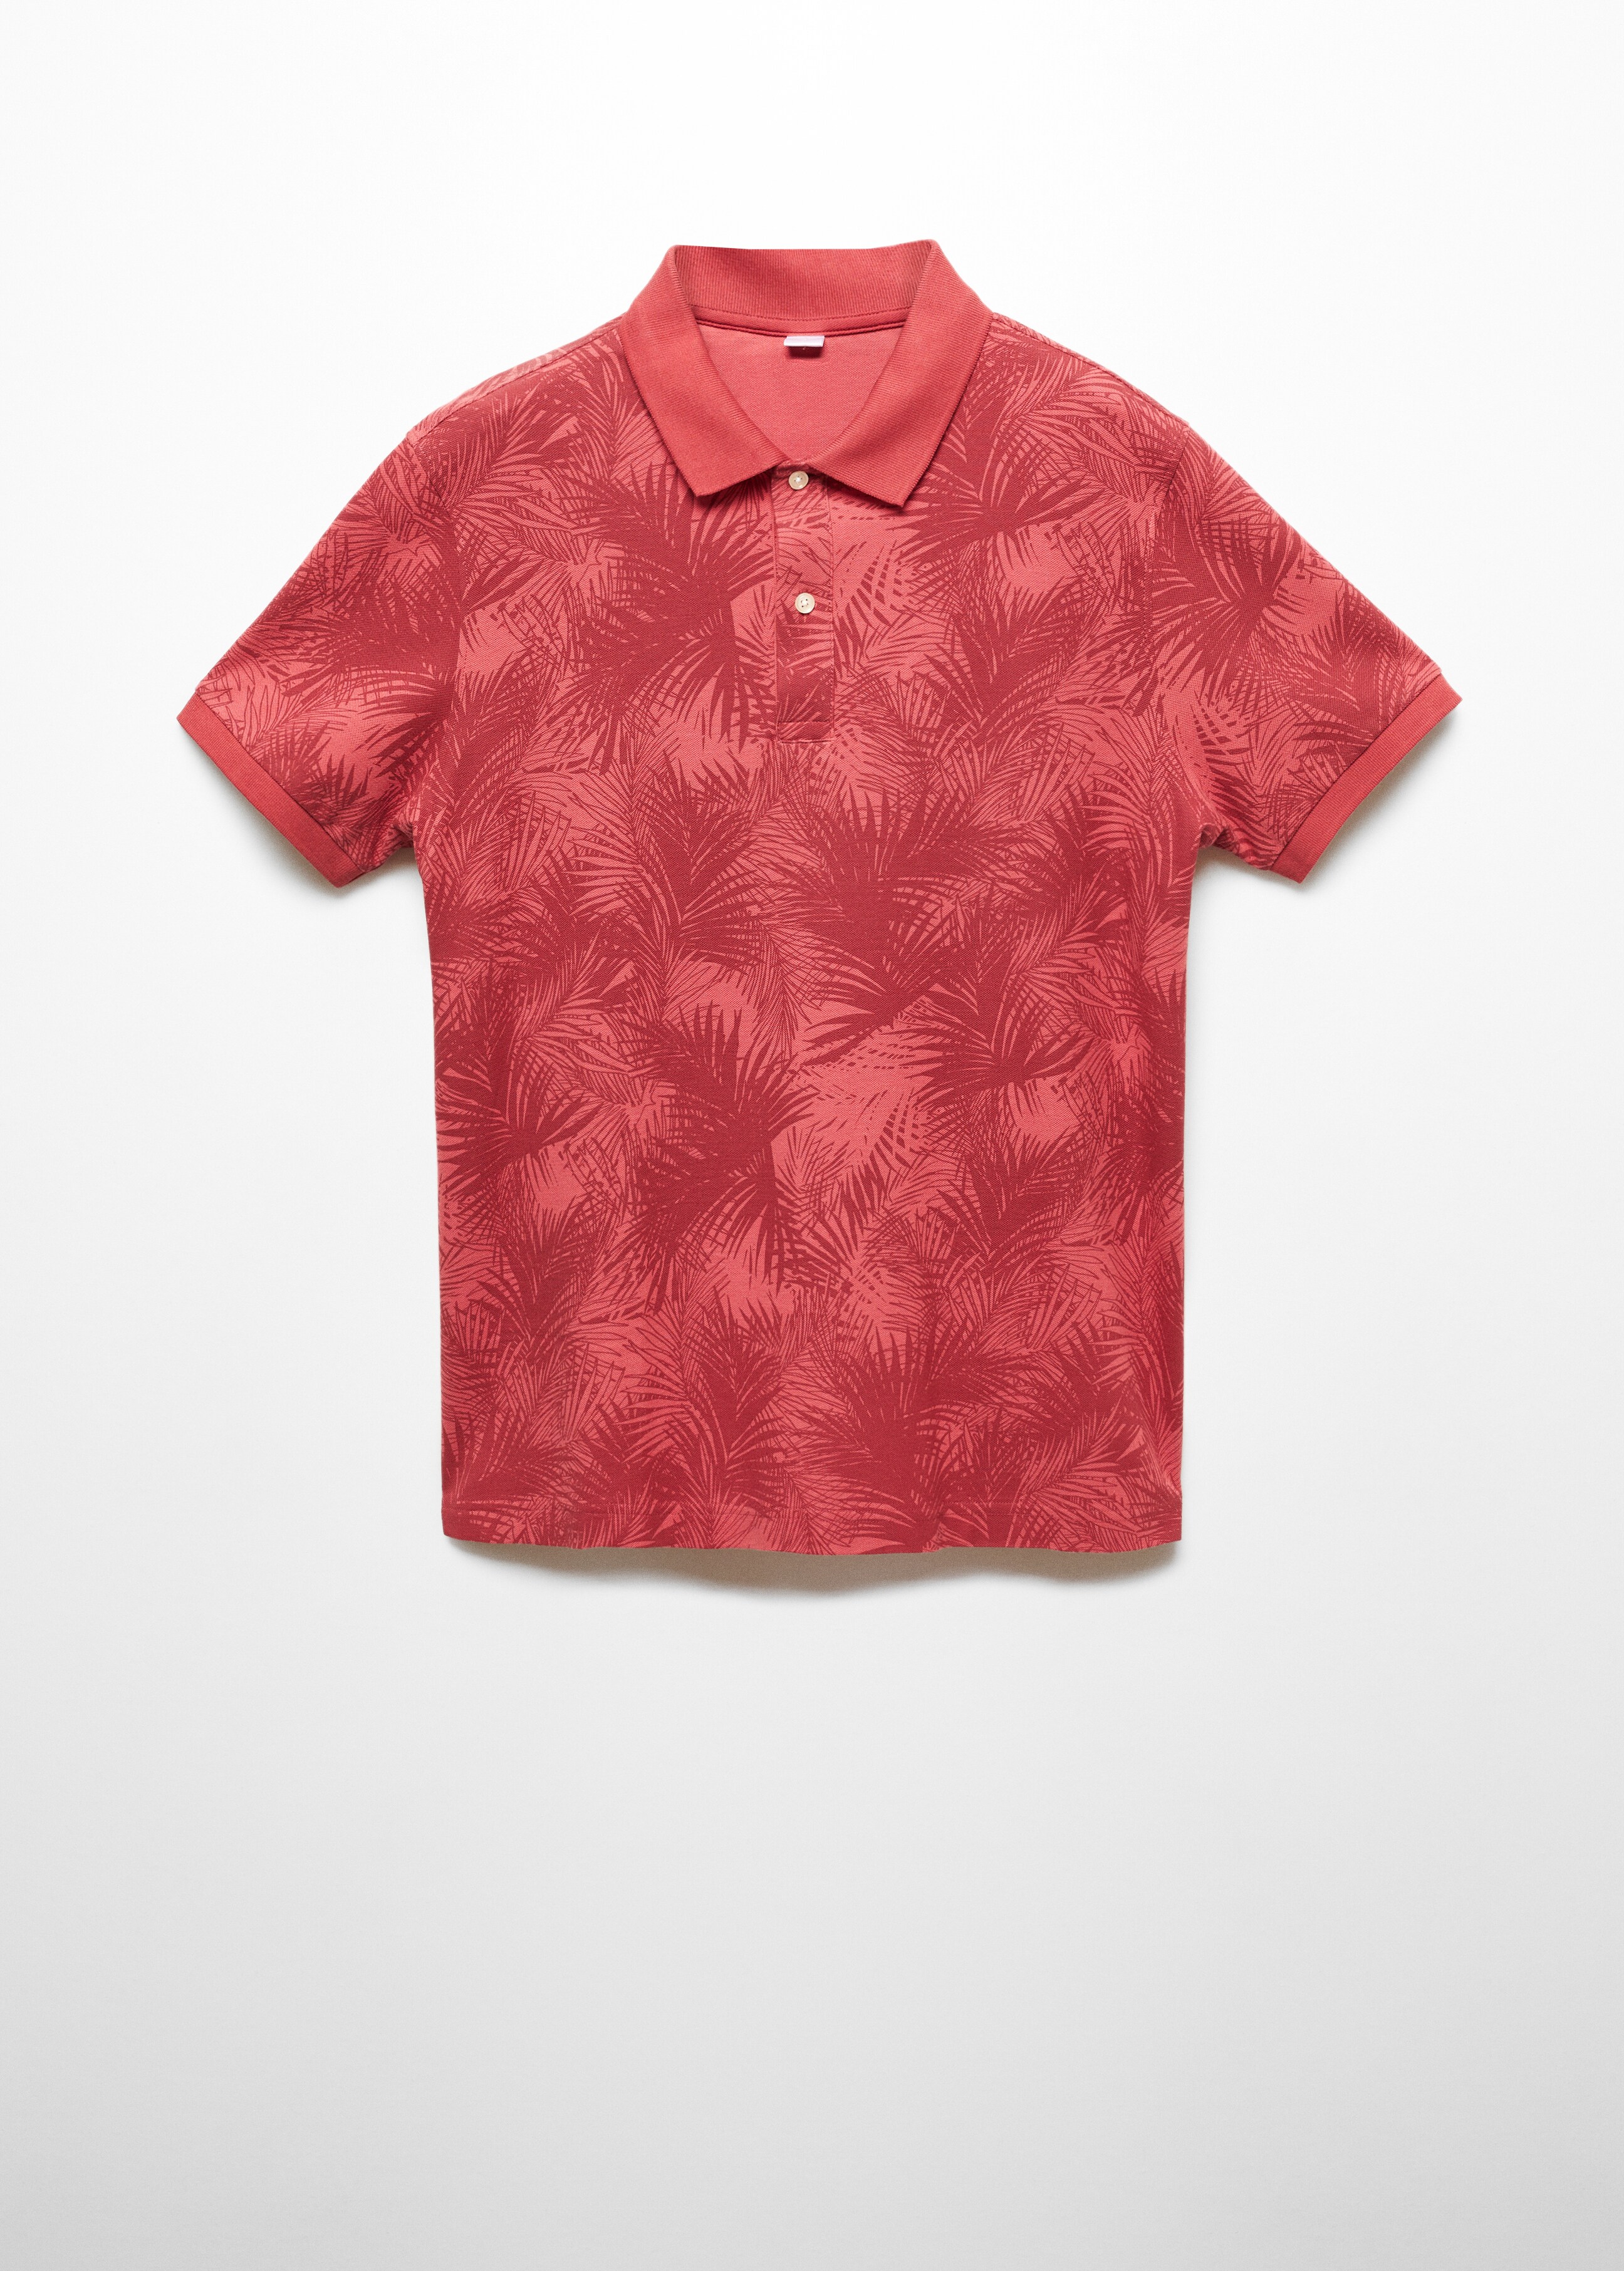 Palm print polo shirt - Article without model